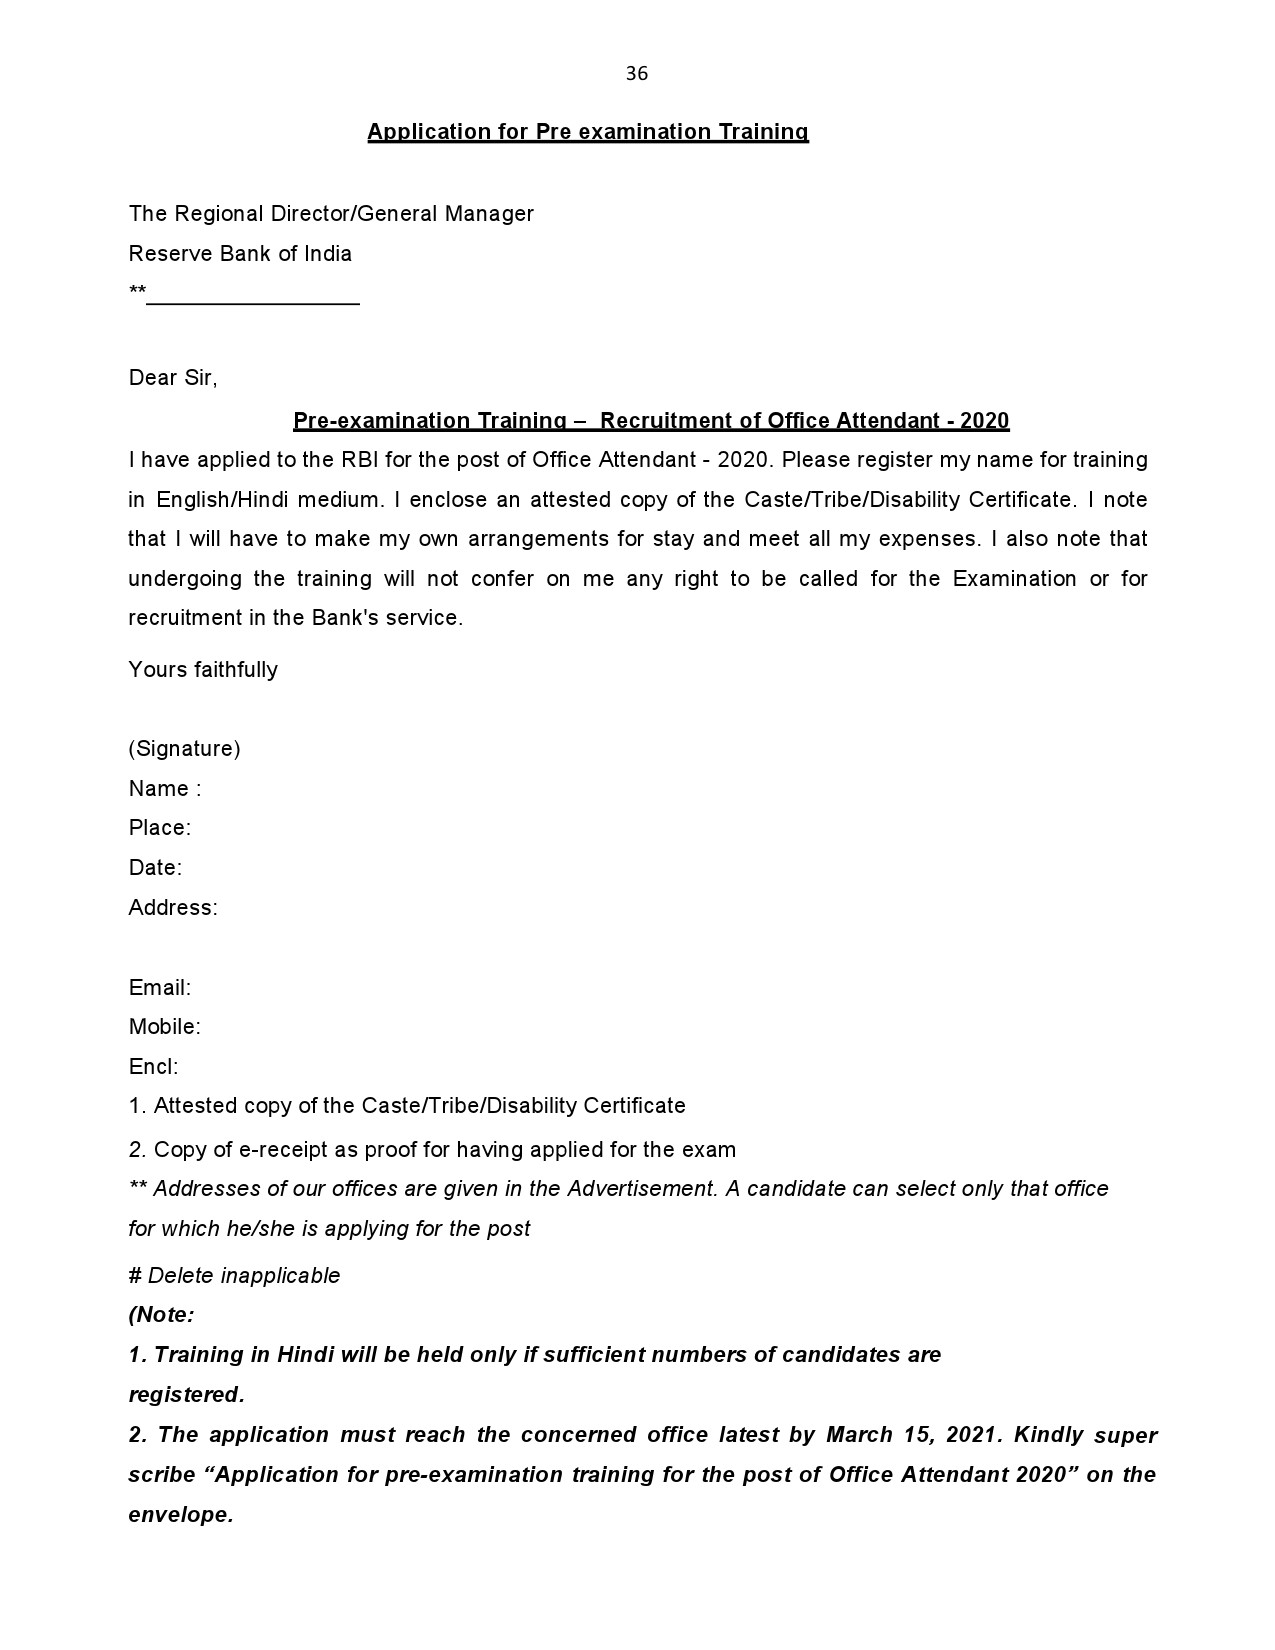 RECRUITMENT FOR THE POST OF OFFICE ATTENDANTS 2020 - Notification Image 36